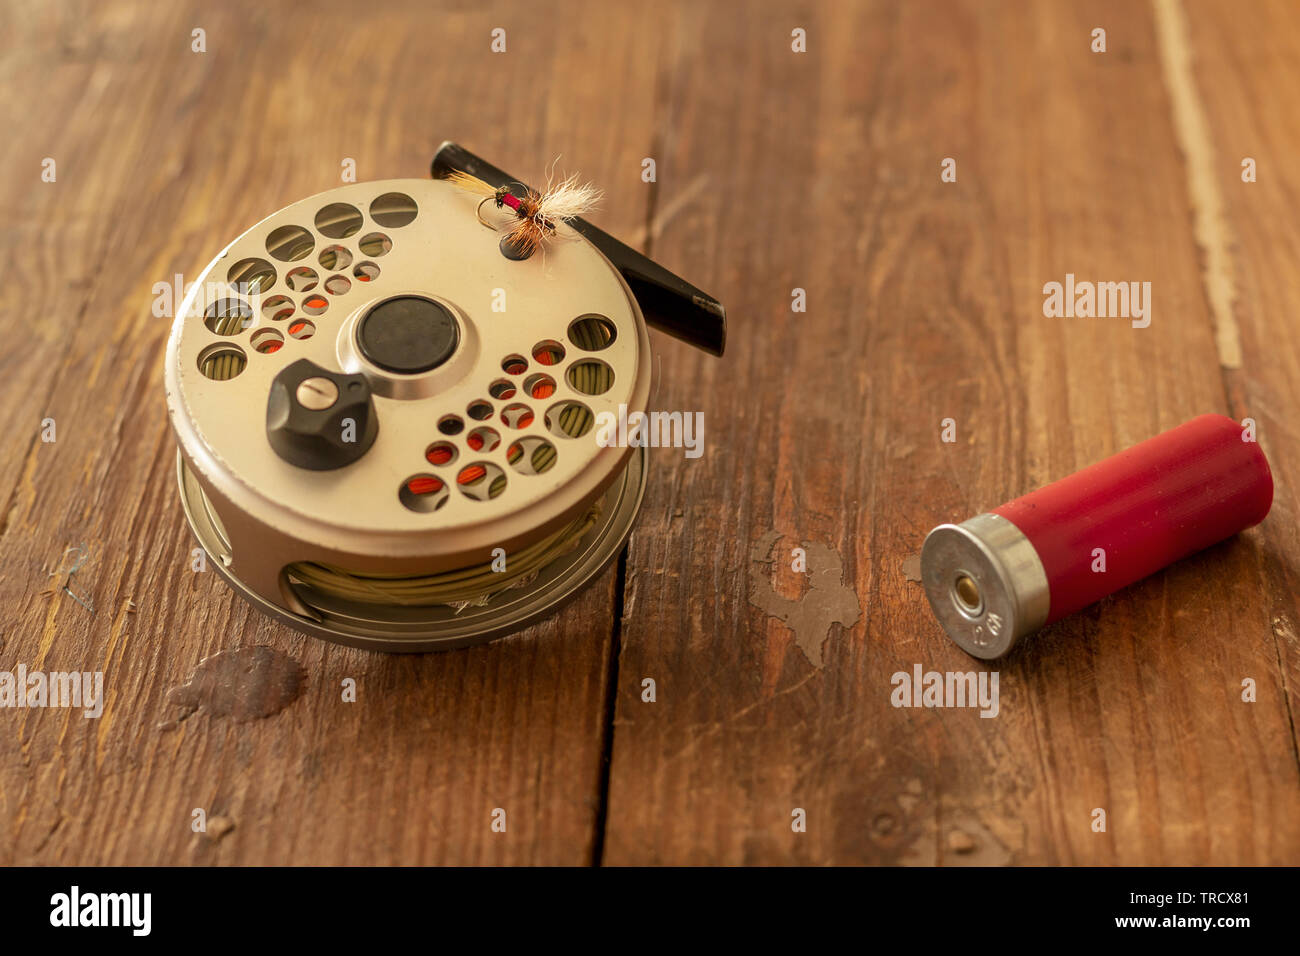 Imag of  a Fly Fishing Reel, fly, And Shot Gun Catridge on Old Wood rusticTable Stock Photo